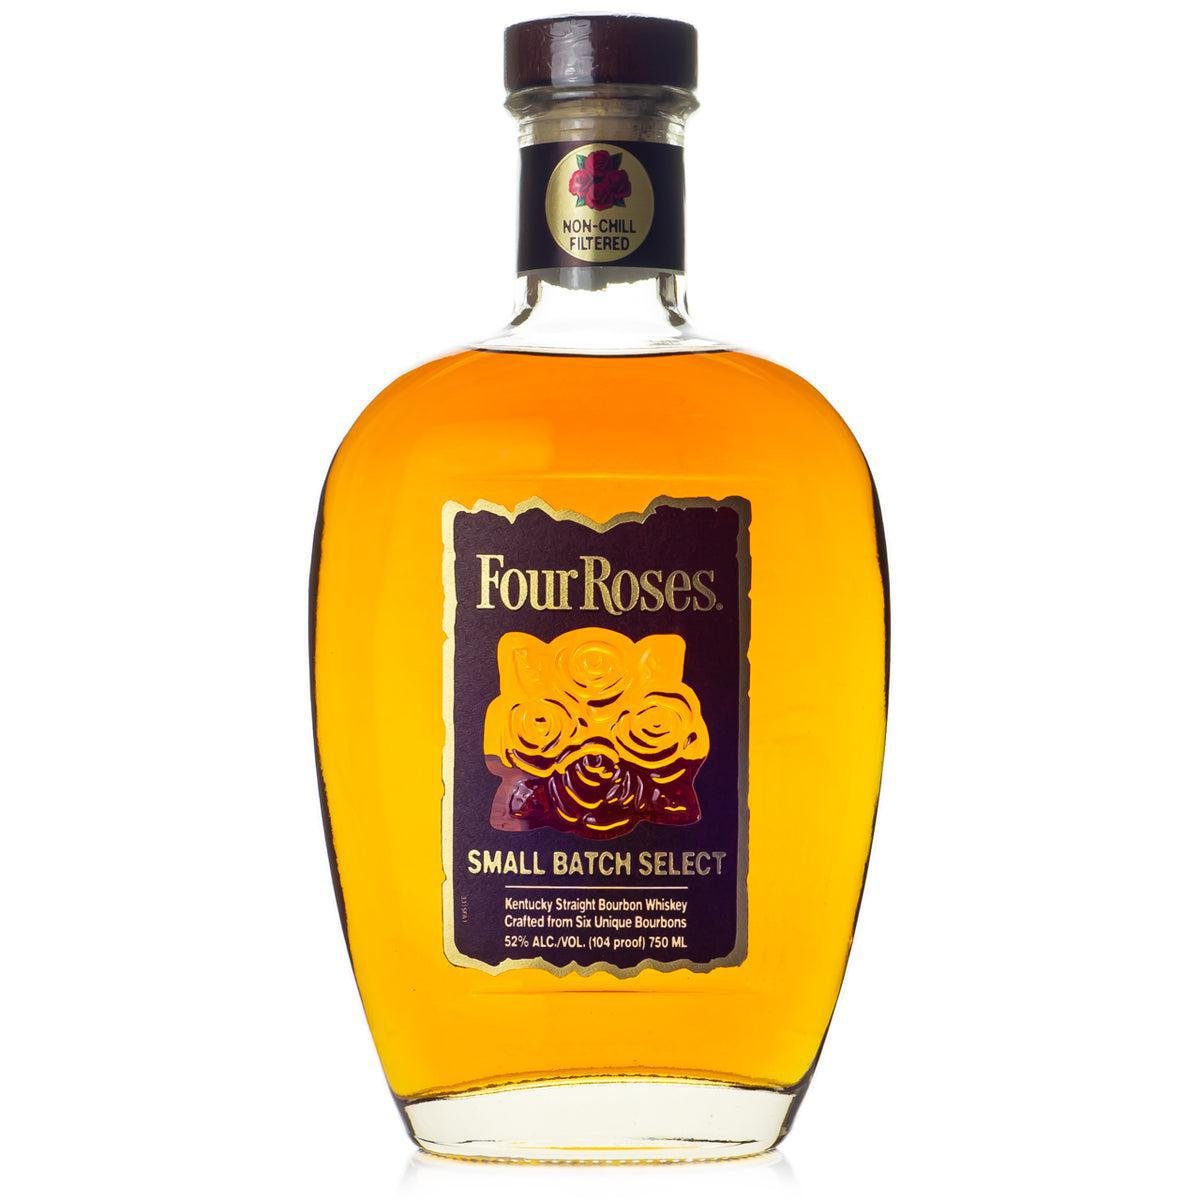 Four Roses - 'Small Batch Select' Bourbon (750ML) - The Epicurean Trader